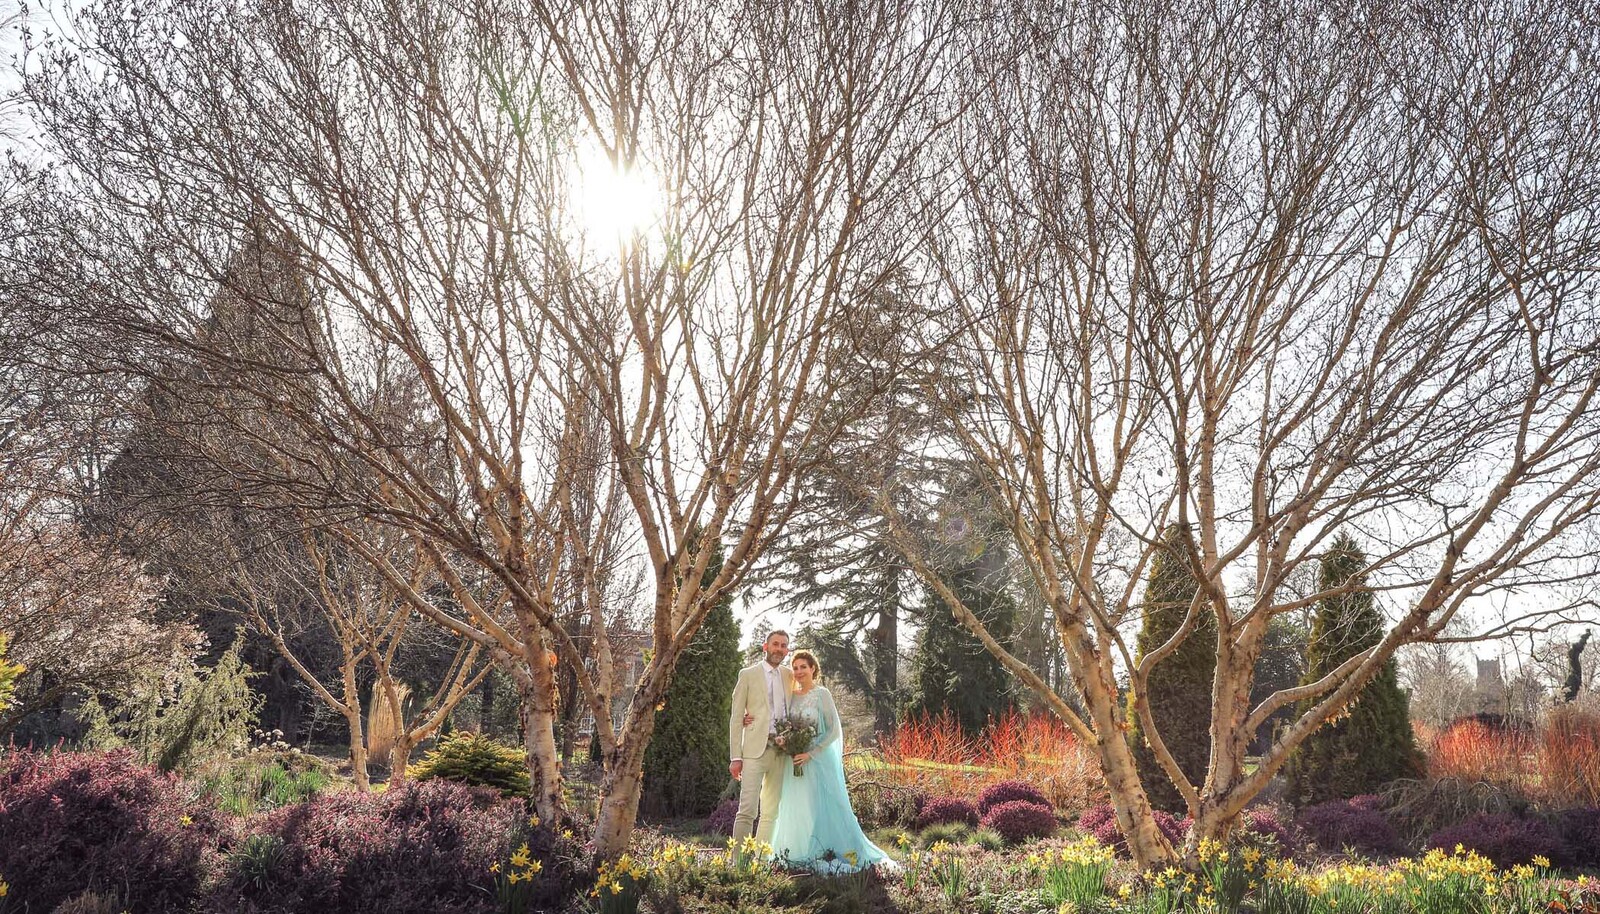 A bride and groom in the winter gardens at Sunset at Bressingham Hall and High Barn on their wedding day photographed by Suffolk Wedding Photographers Hayley Denston Photography